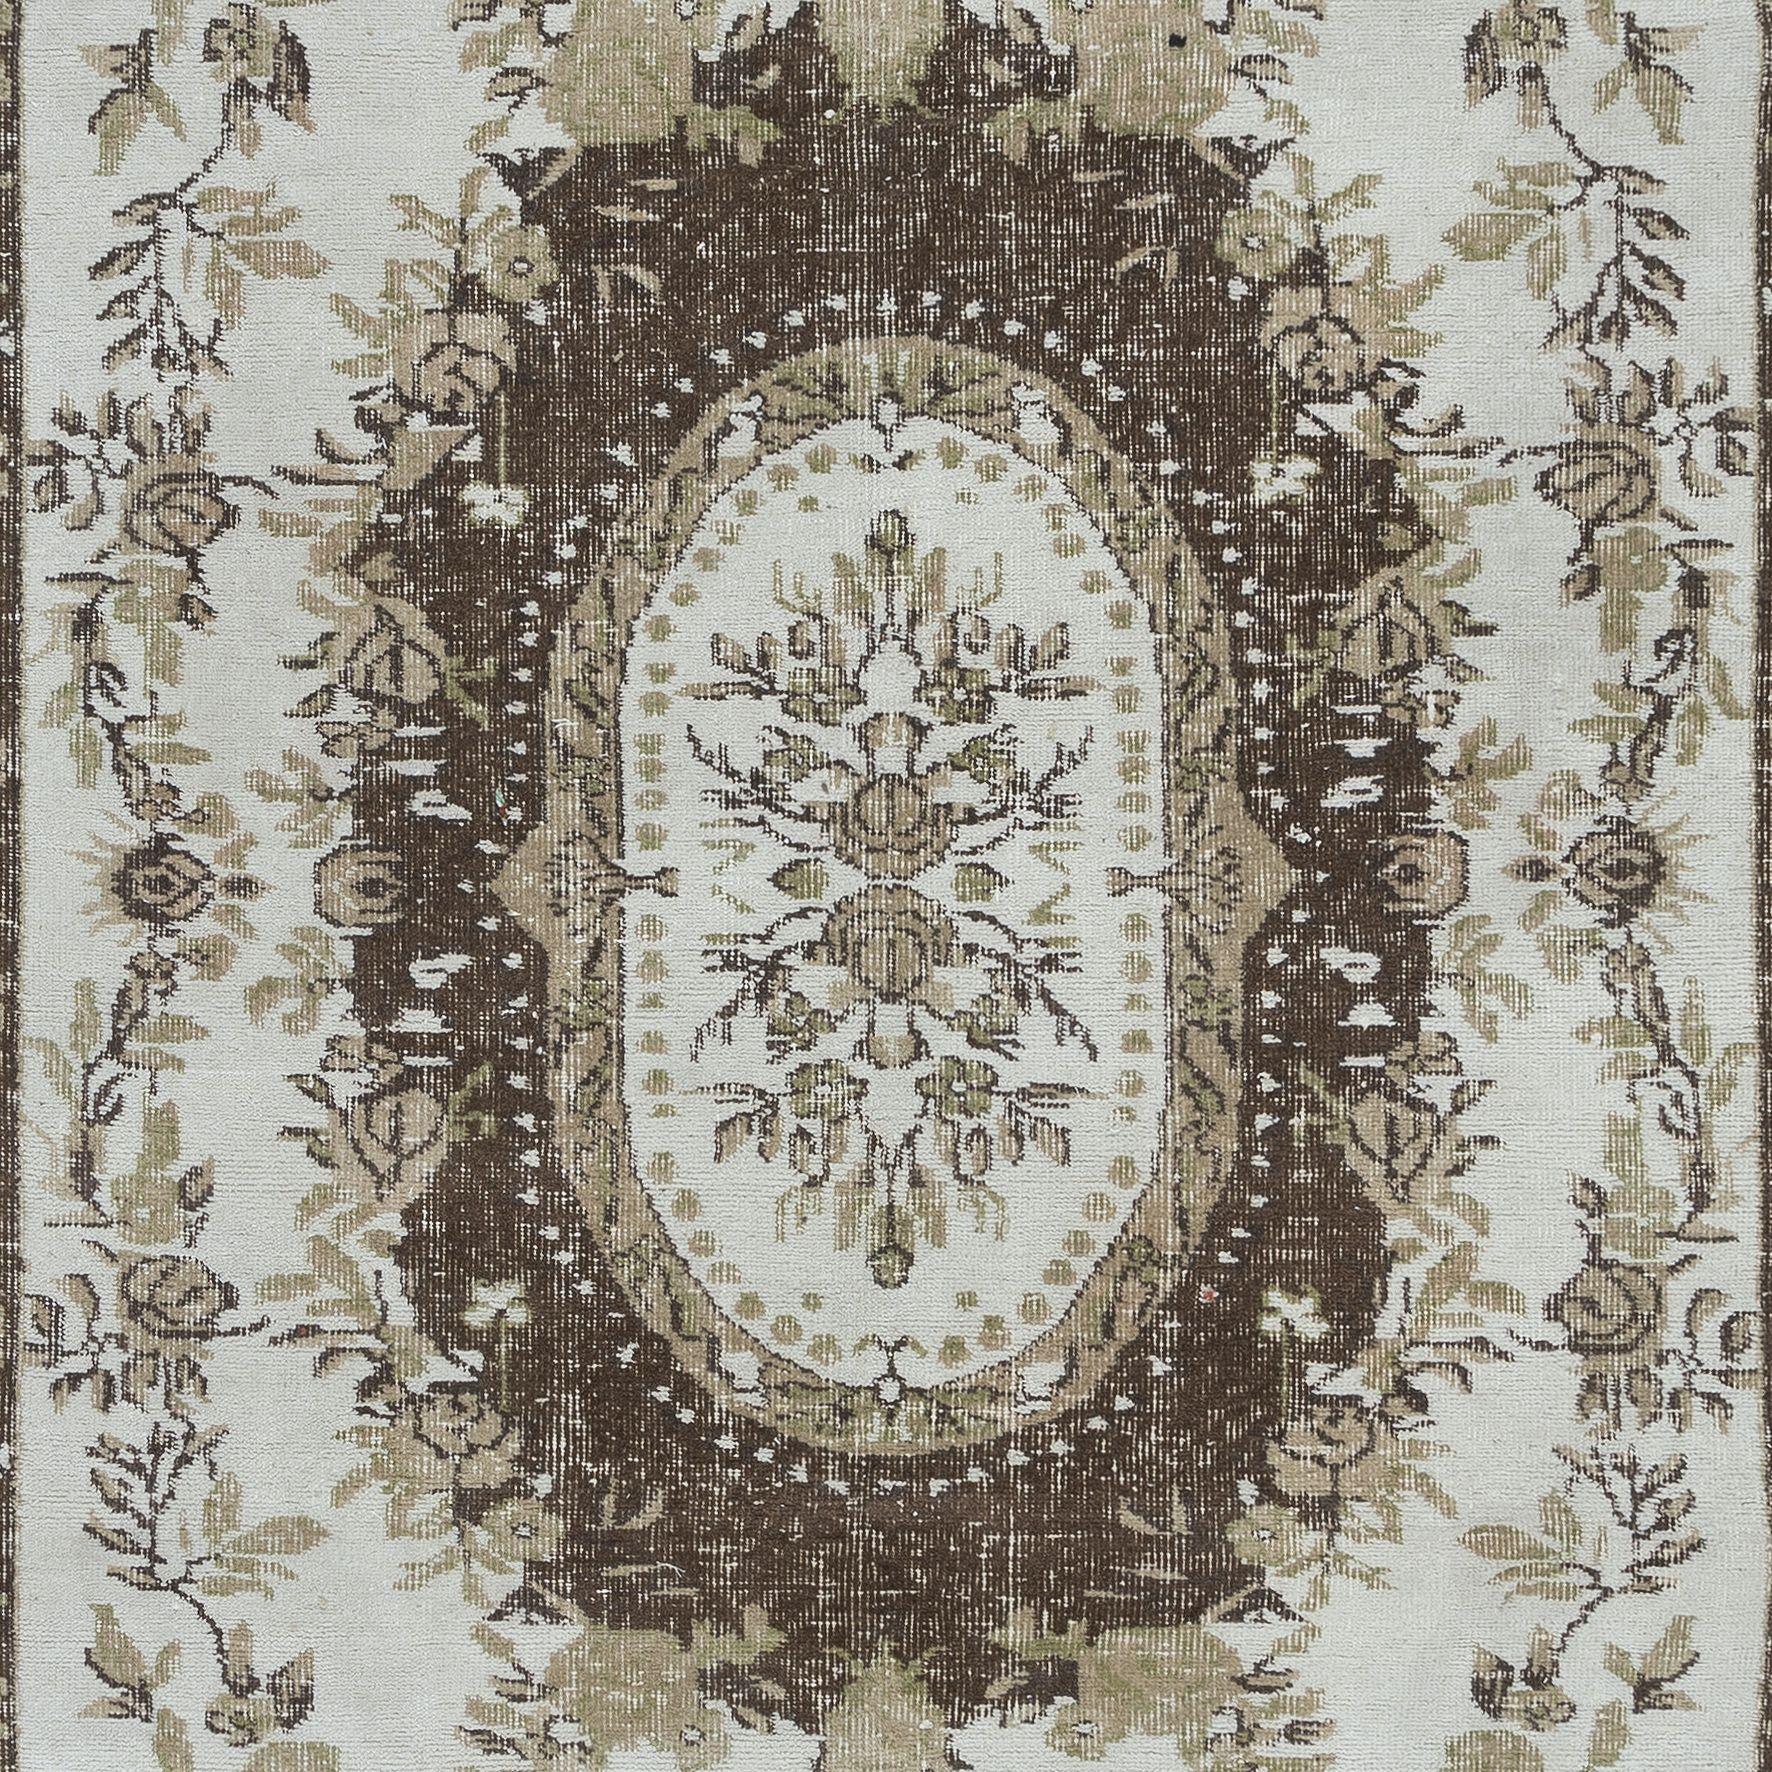 5.4x8.4 Ft Classic Aubusson Inspired Vintage Handmade Faded Teppich in Beige & Brown im Zustand „Gut“ im Angebot in Philadelphia, PA